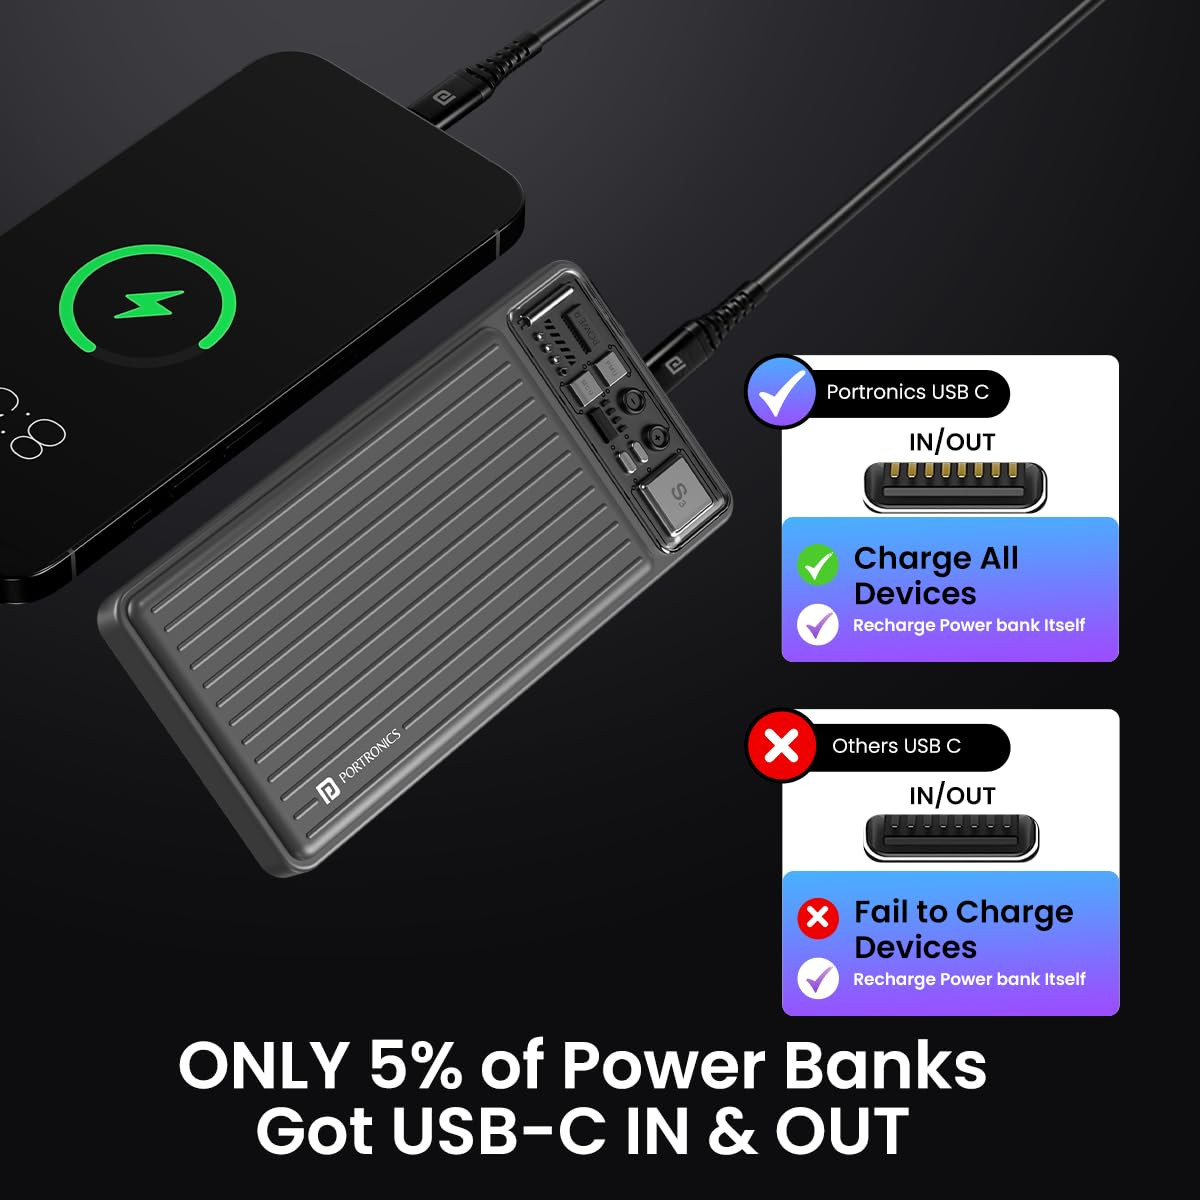 Portronics Luxcell 10K 10000 mAh Designer Power Bank with 225W Max Output LED Indicator Mach USB-A Output